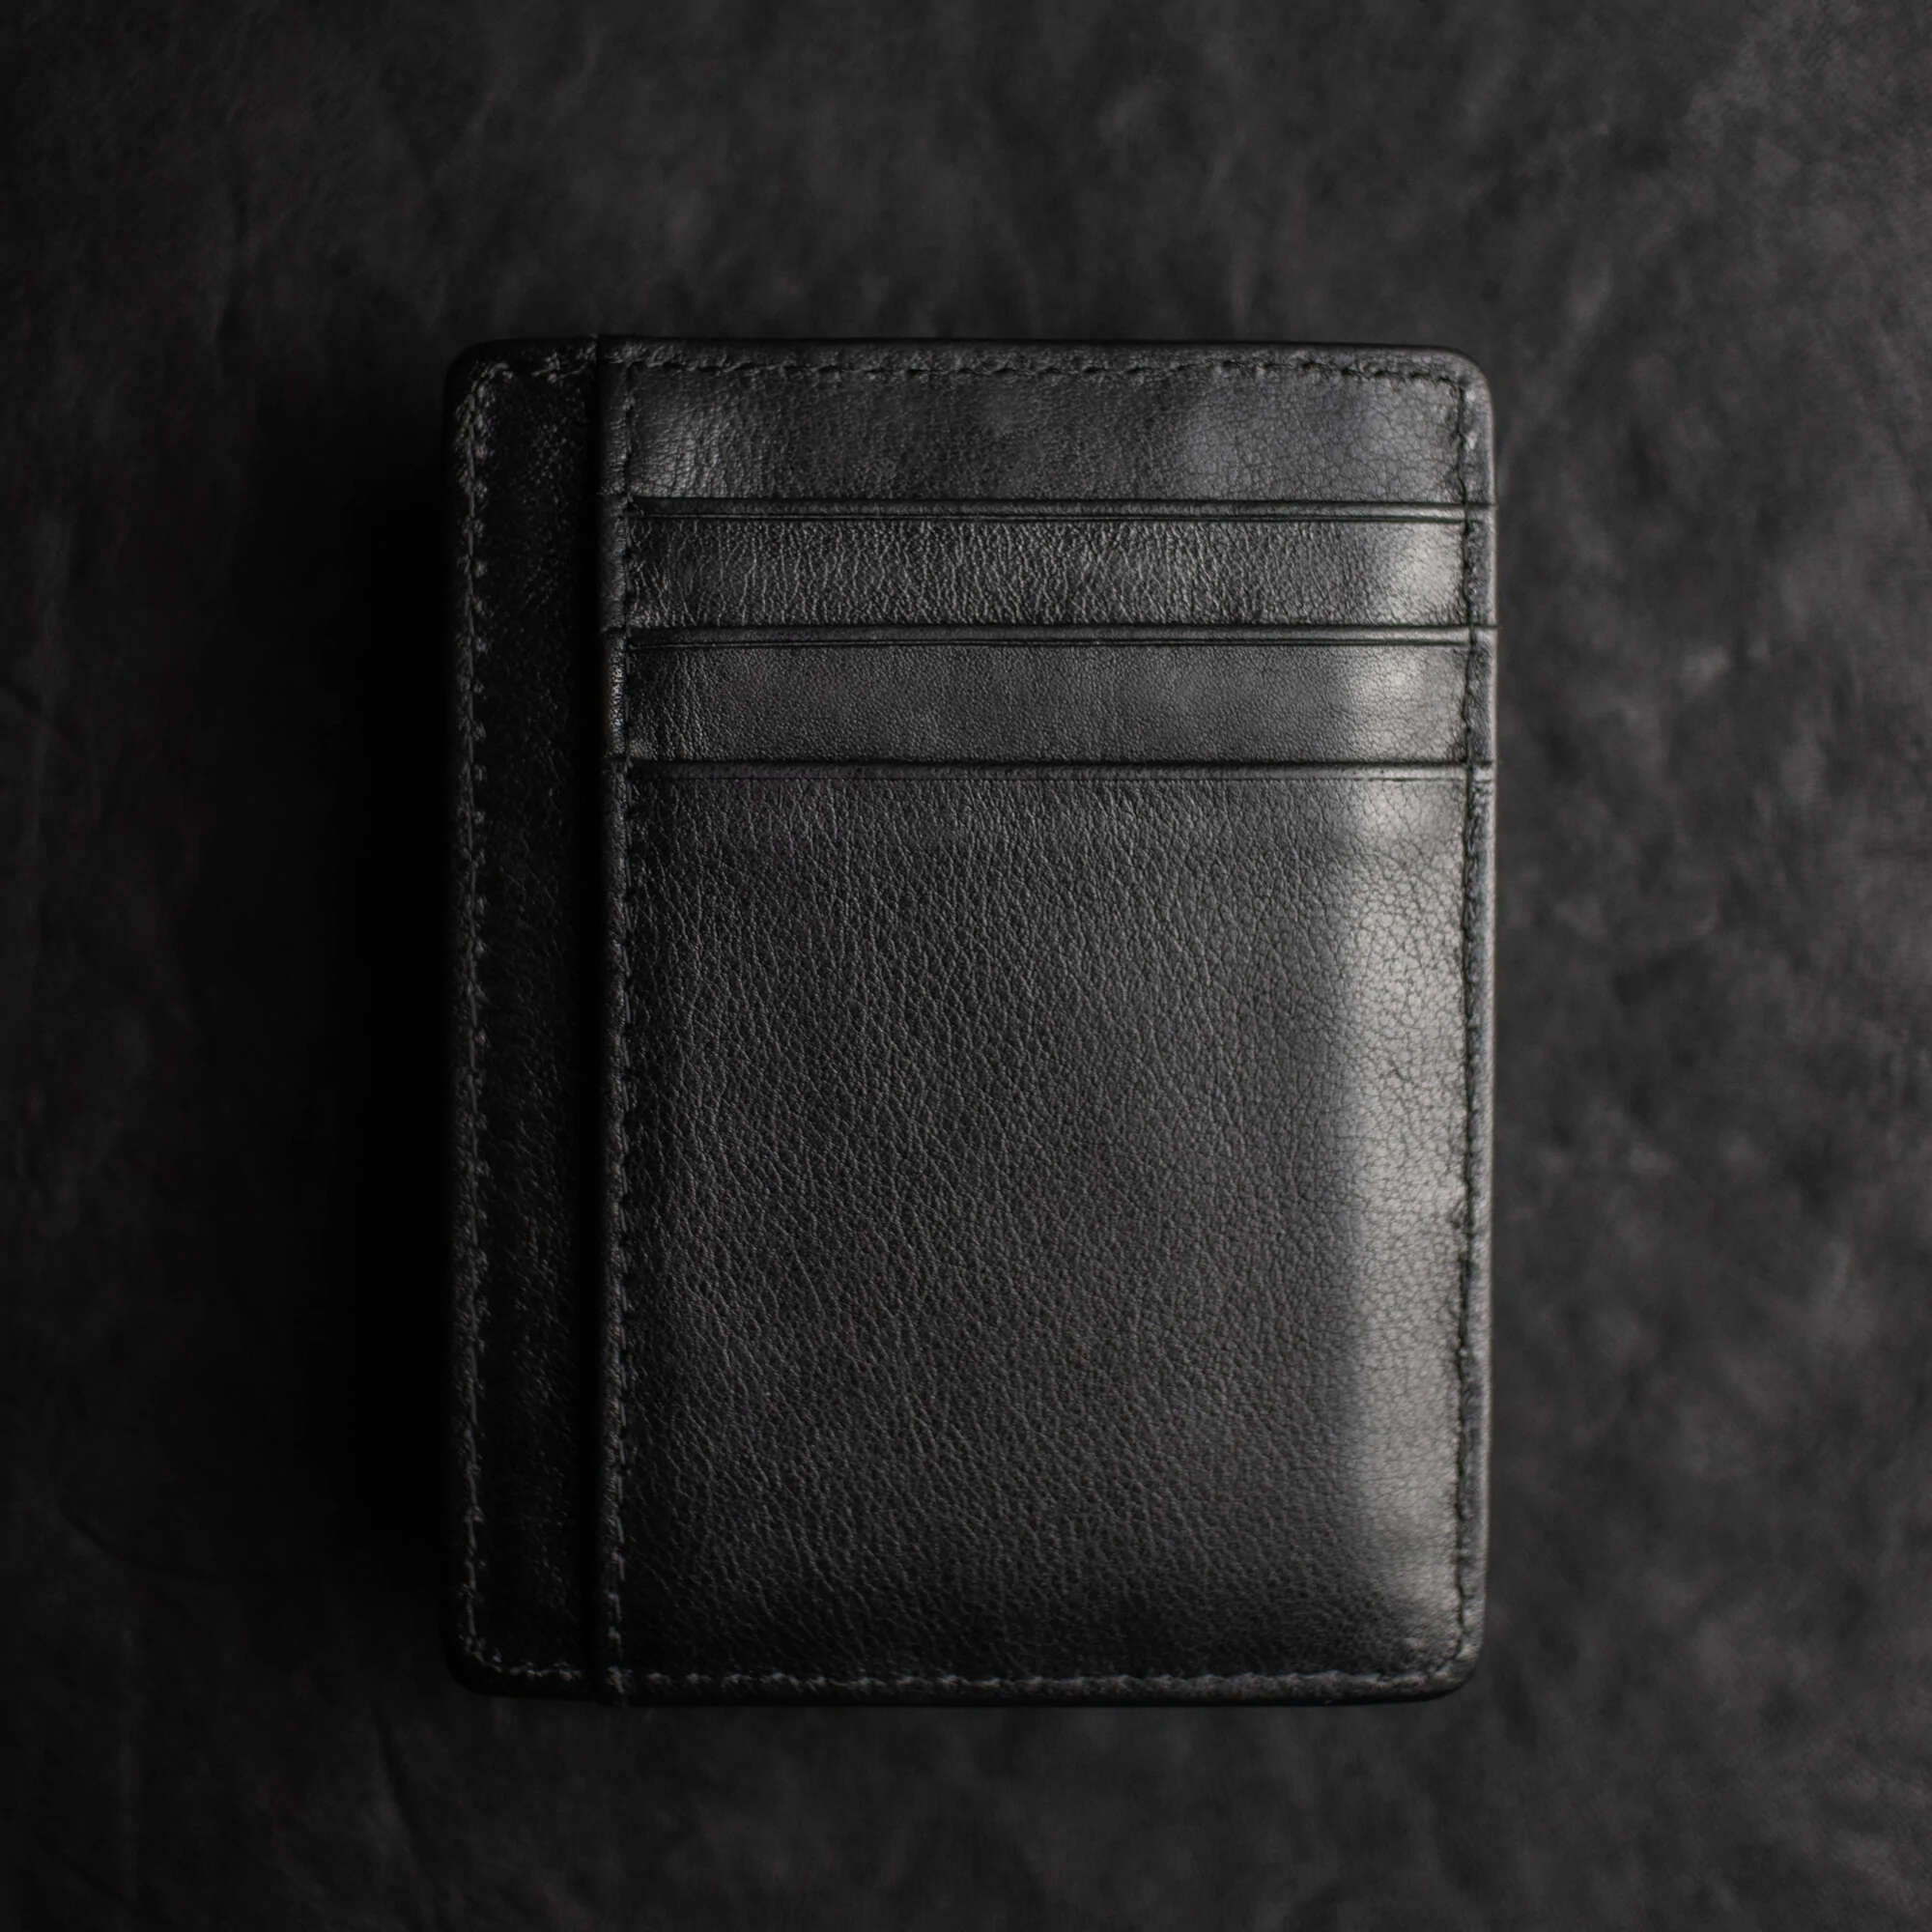 Black Shadow Wallet by Dee Christopher on black surface (back view)